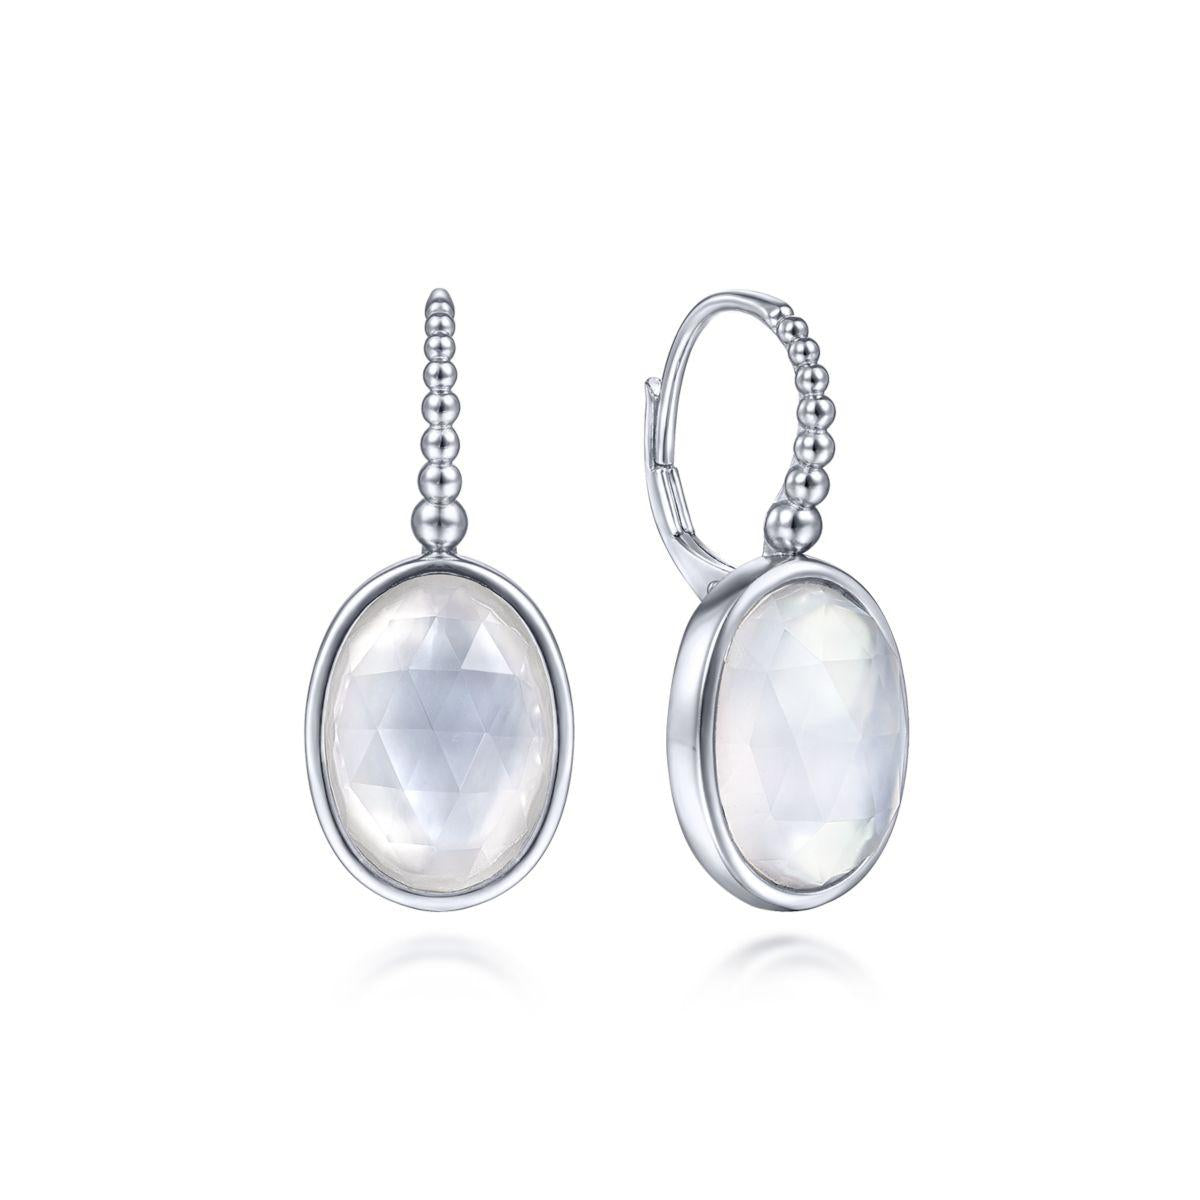 925 Sterling Silver Rock Crystal and White MOP Drop Earrings